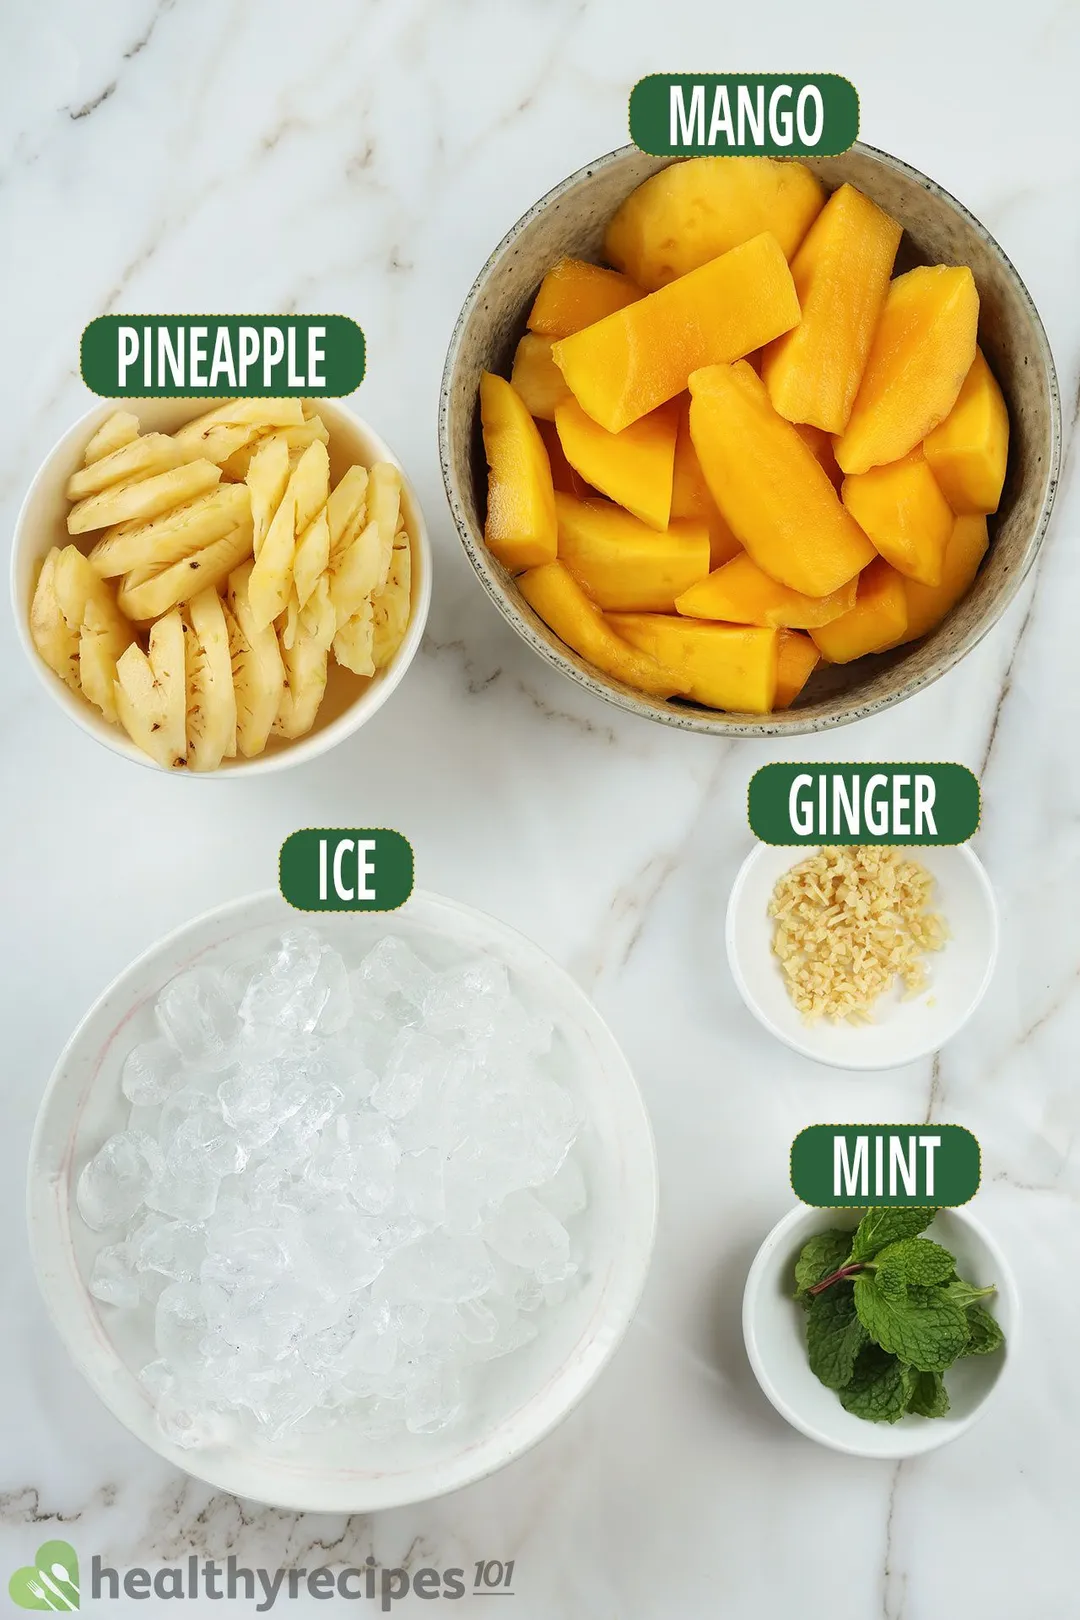 Ingredients for Mango Ginger Smoothie, including bowls of mango wedges, pineapple slices, ice, sliced ginger, and mint leaves.